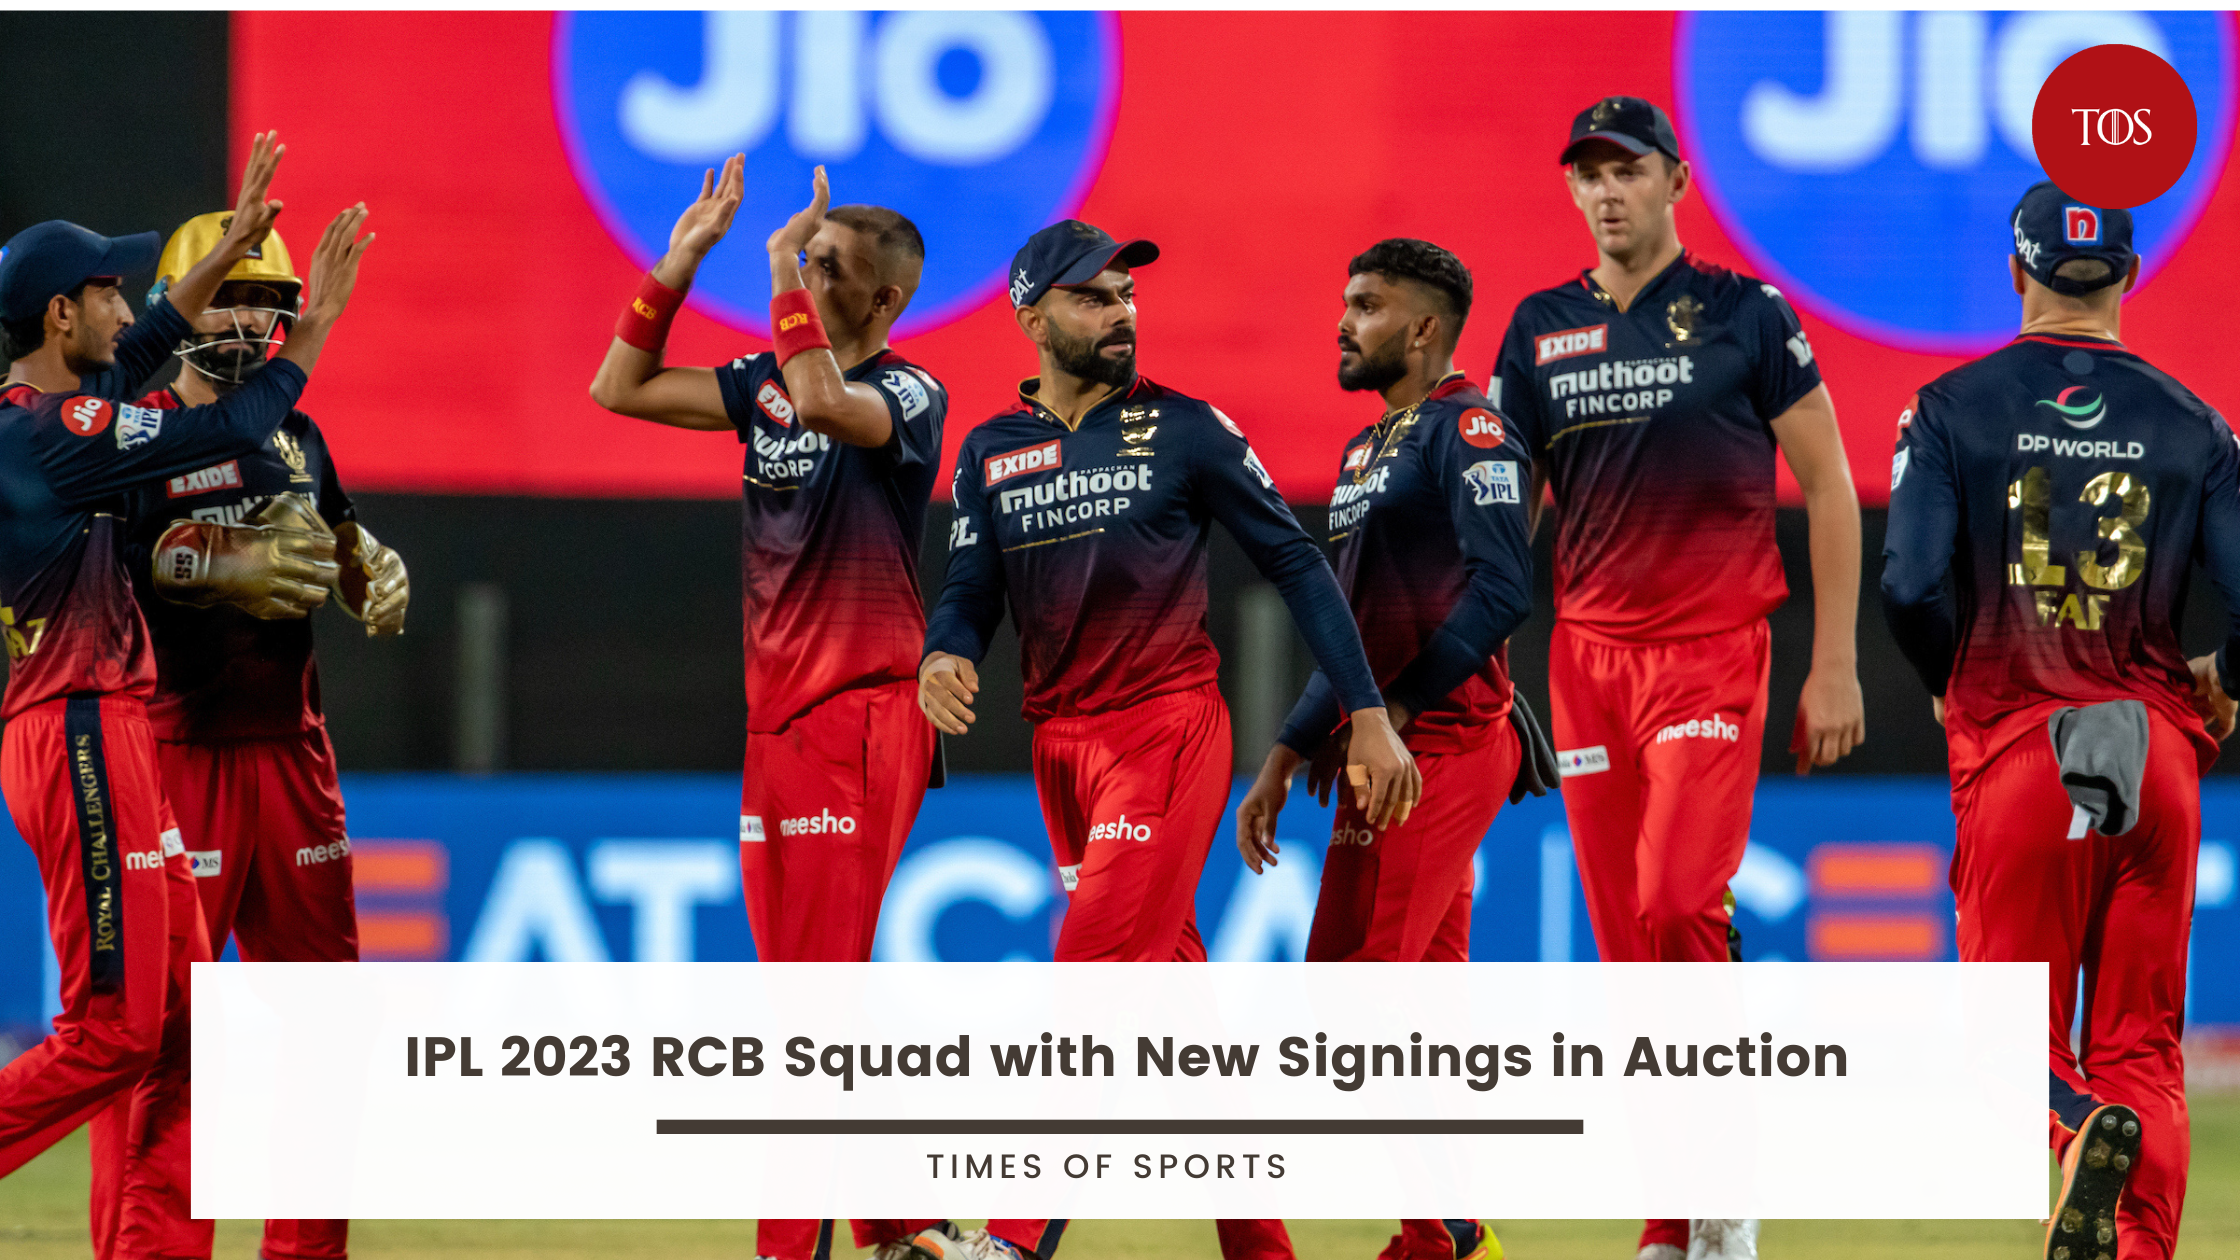 IPL 2023 Schedule, Retained Players List, Auction Date, Start Date,  Released Players List, Retained Players RCB, Auction Players List